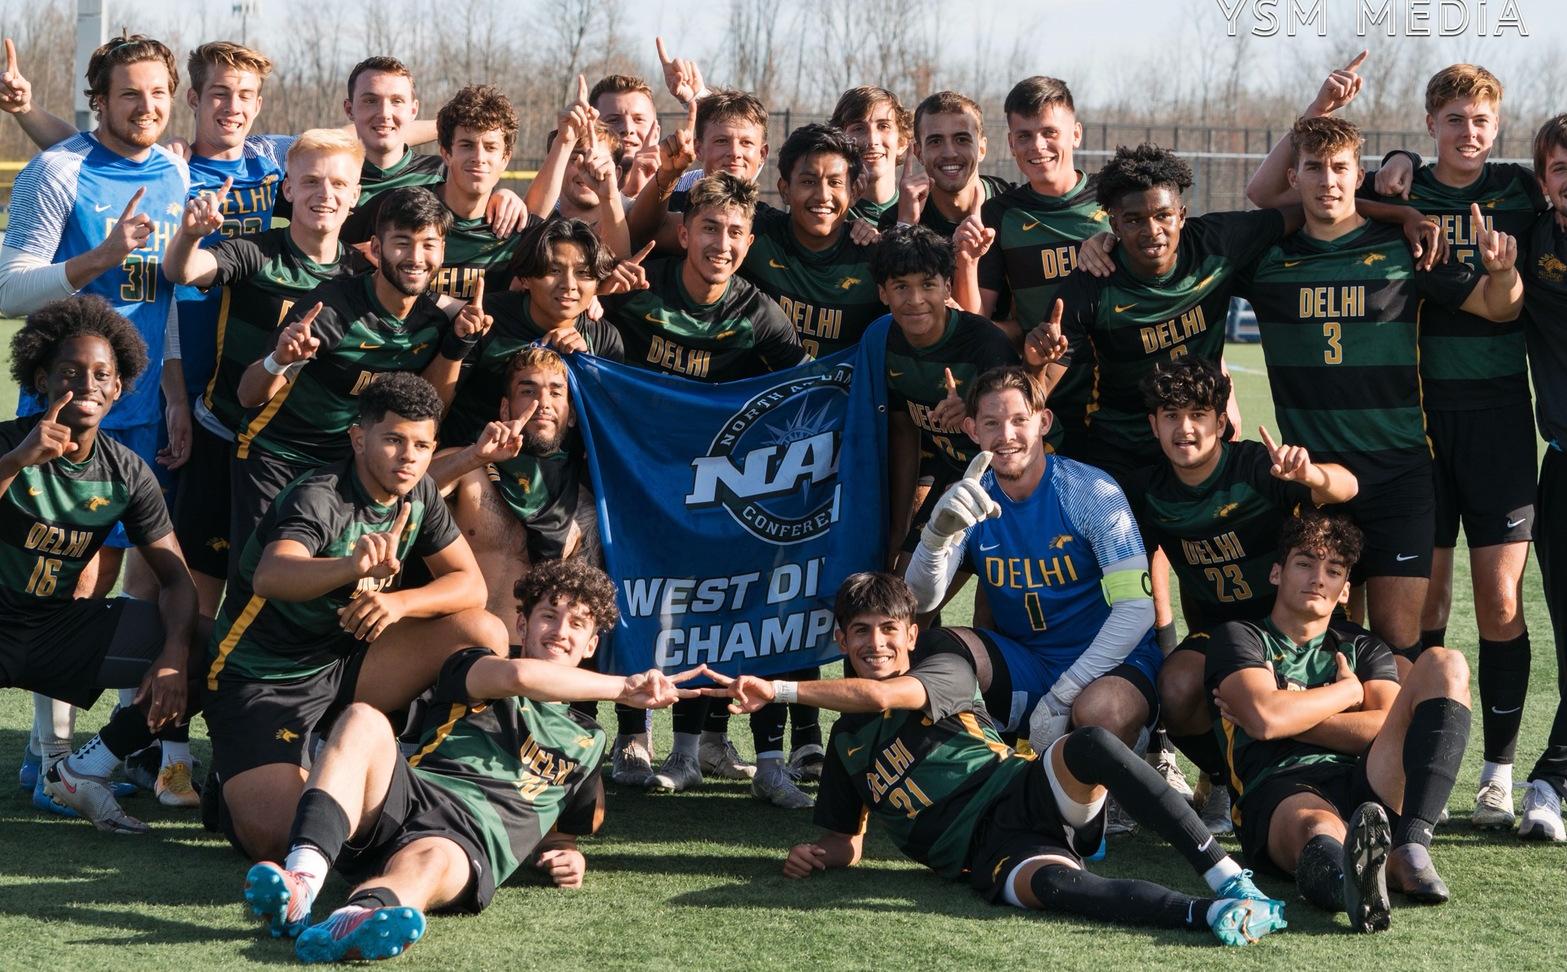 Delhi Men's Soccer Wins NAC West beating SUNY Poly 1-0 to advance to NAC Championship 